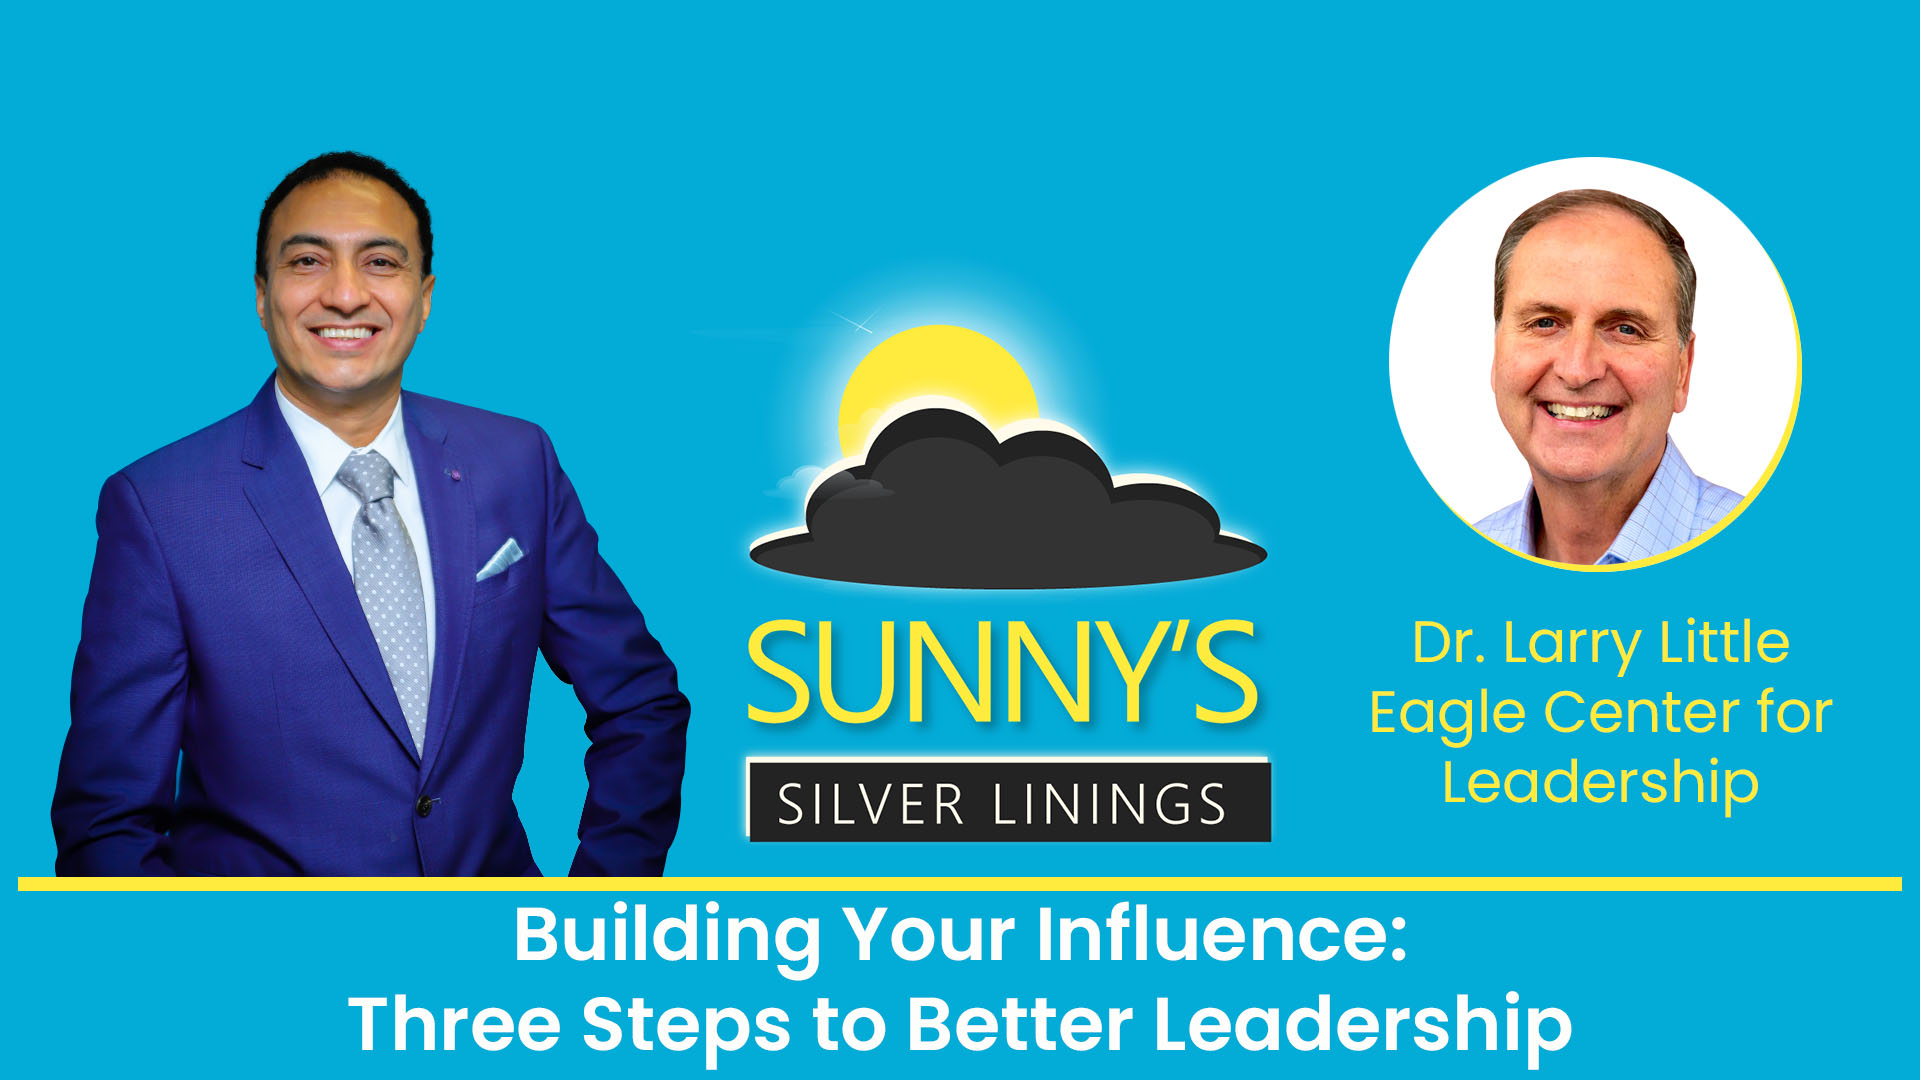 Building Your Influence: Three Steps to Better Leadership with guest Dr. Larry Little